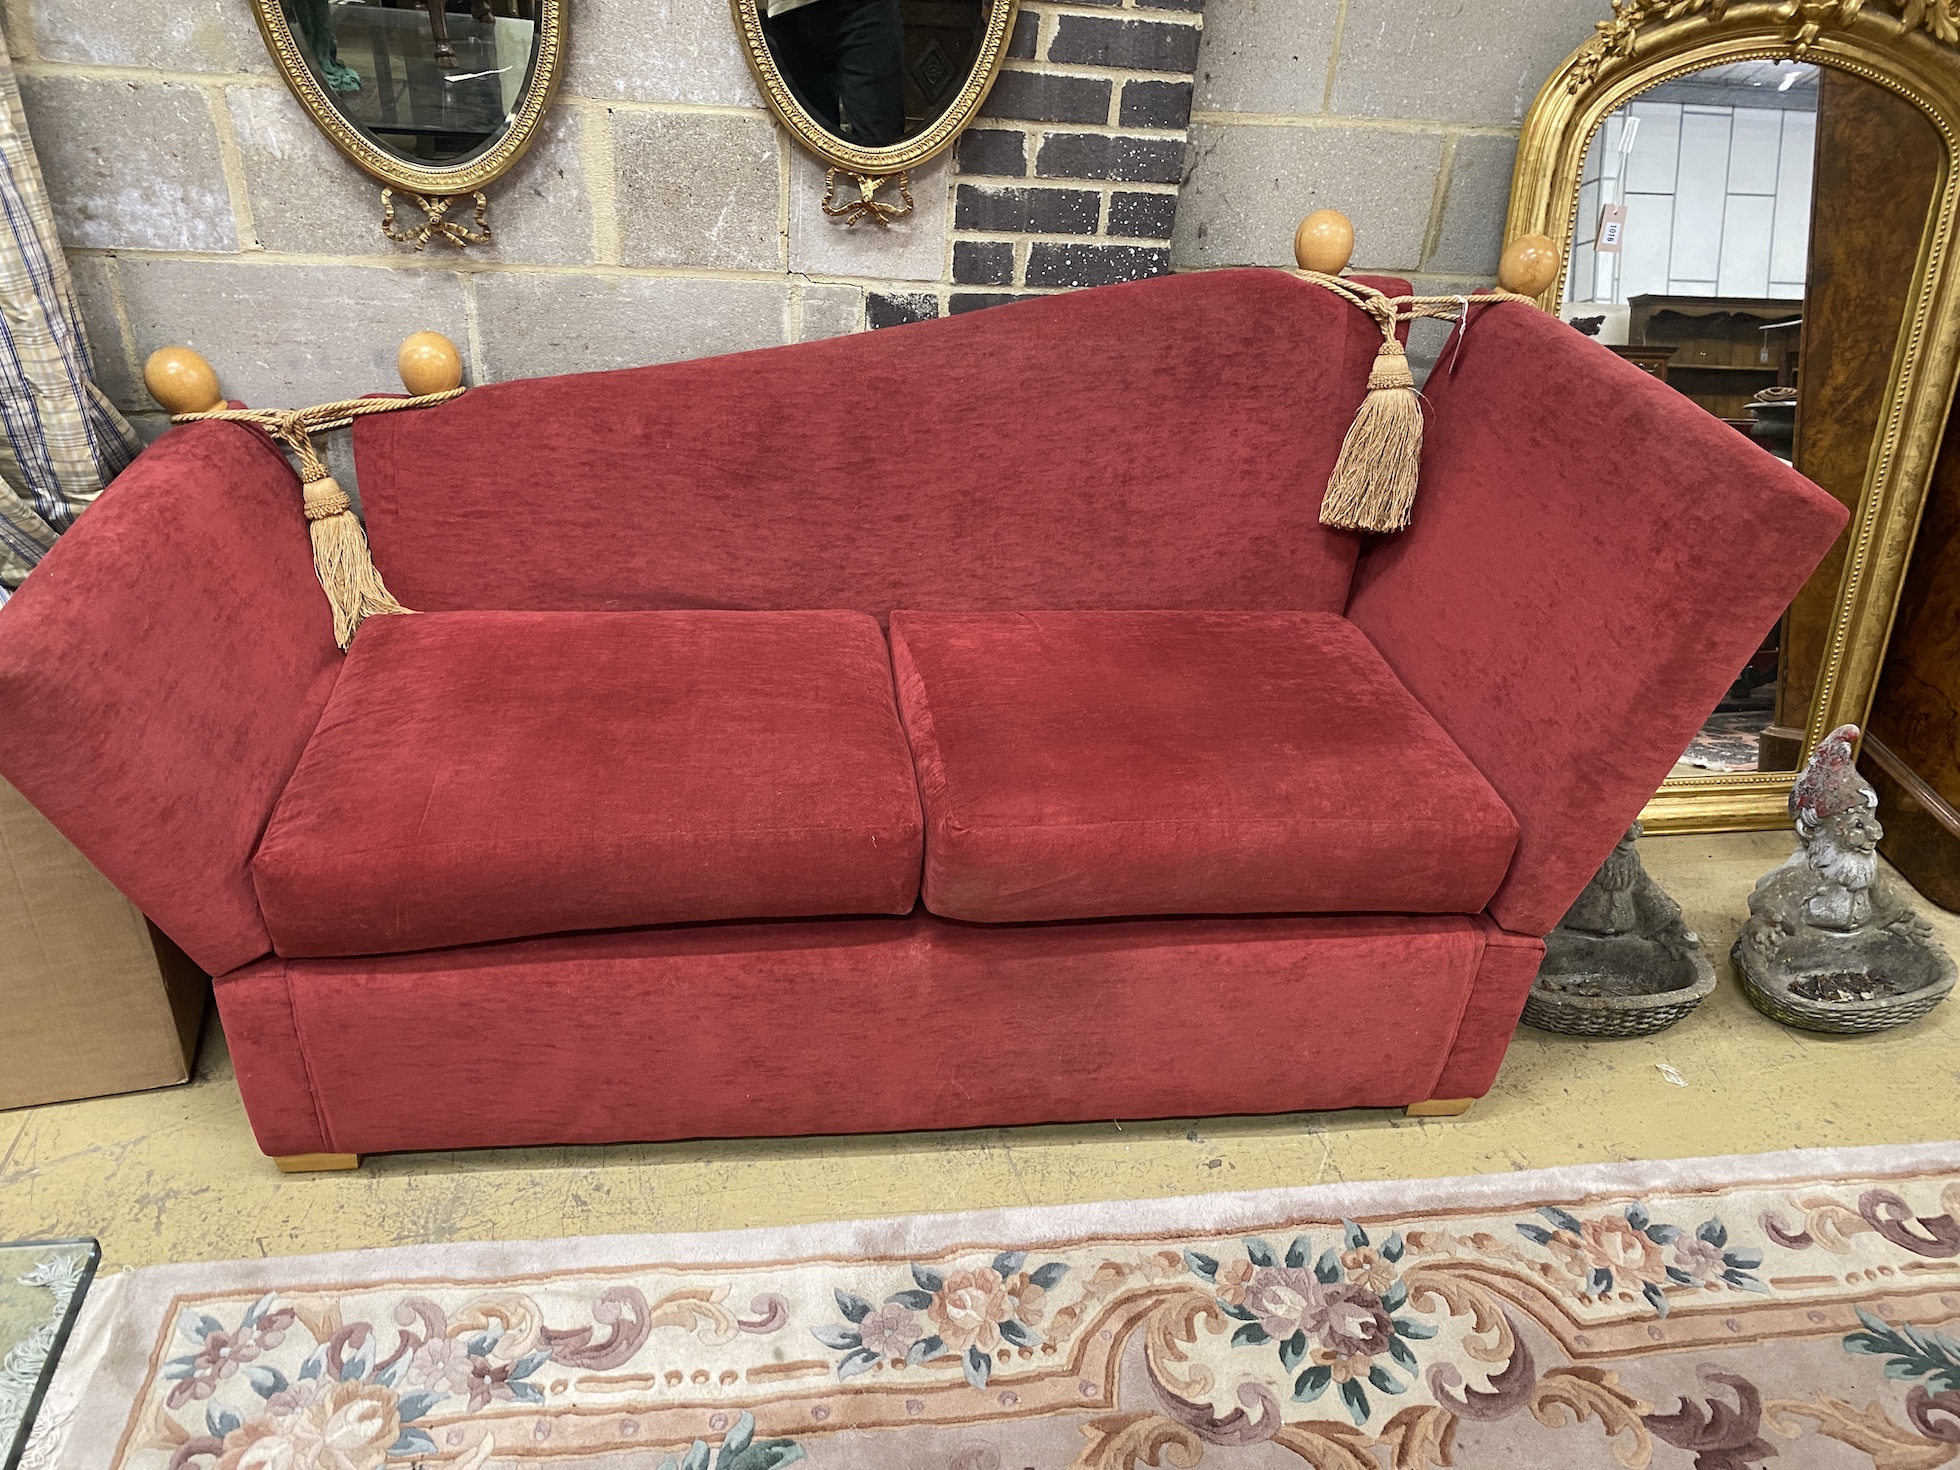 A contemporary Knole settee with red fabric upholstery, length 200cm, depth 82cm, height 105cm